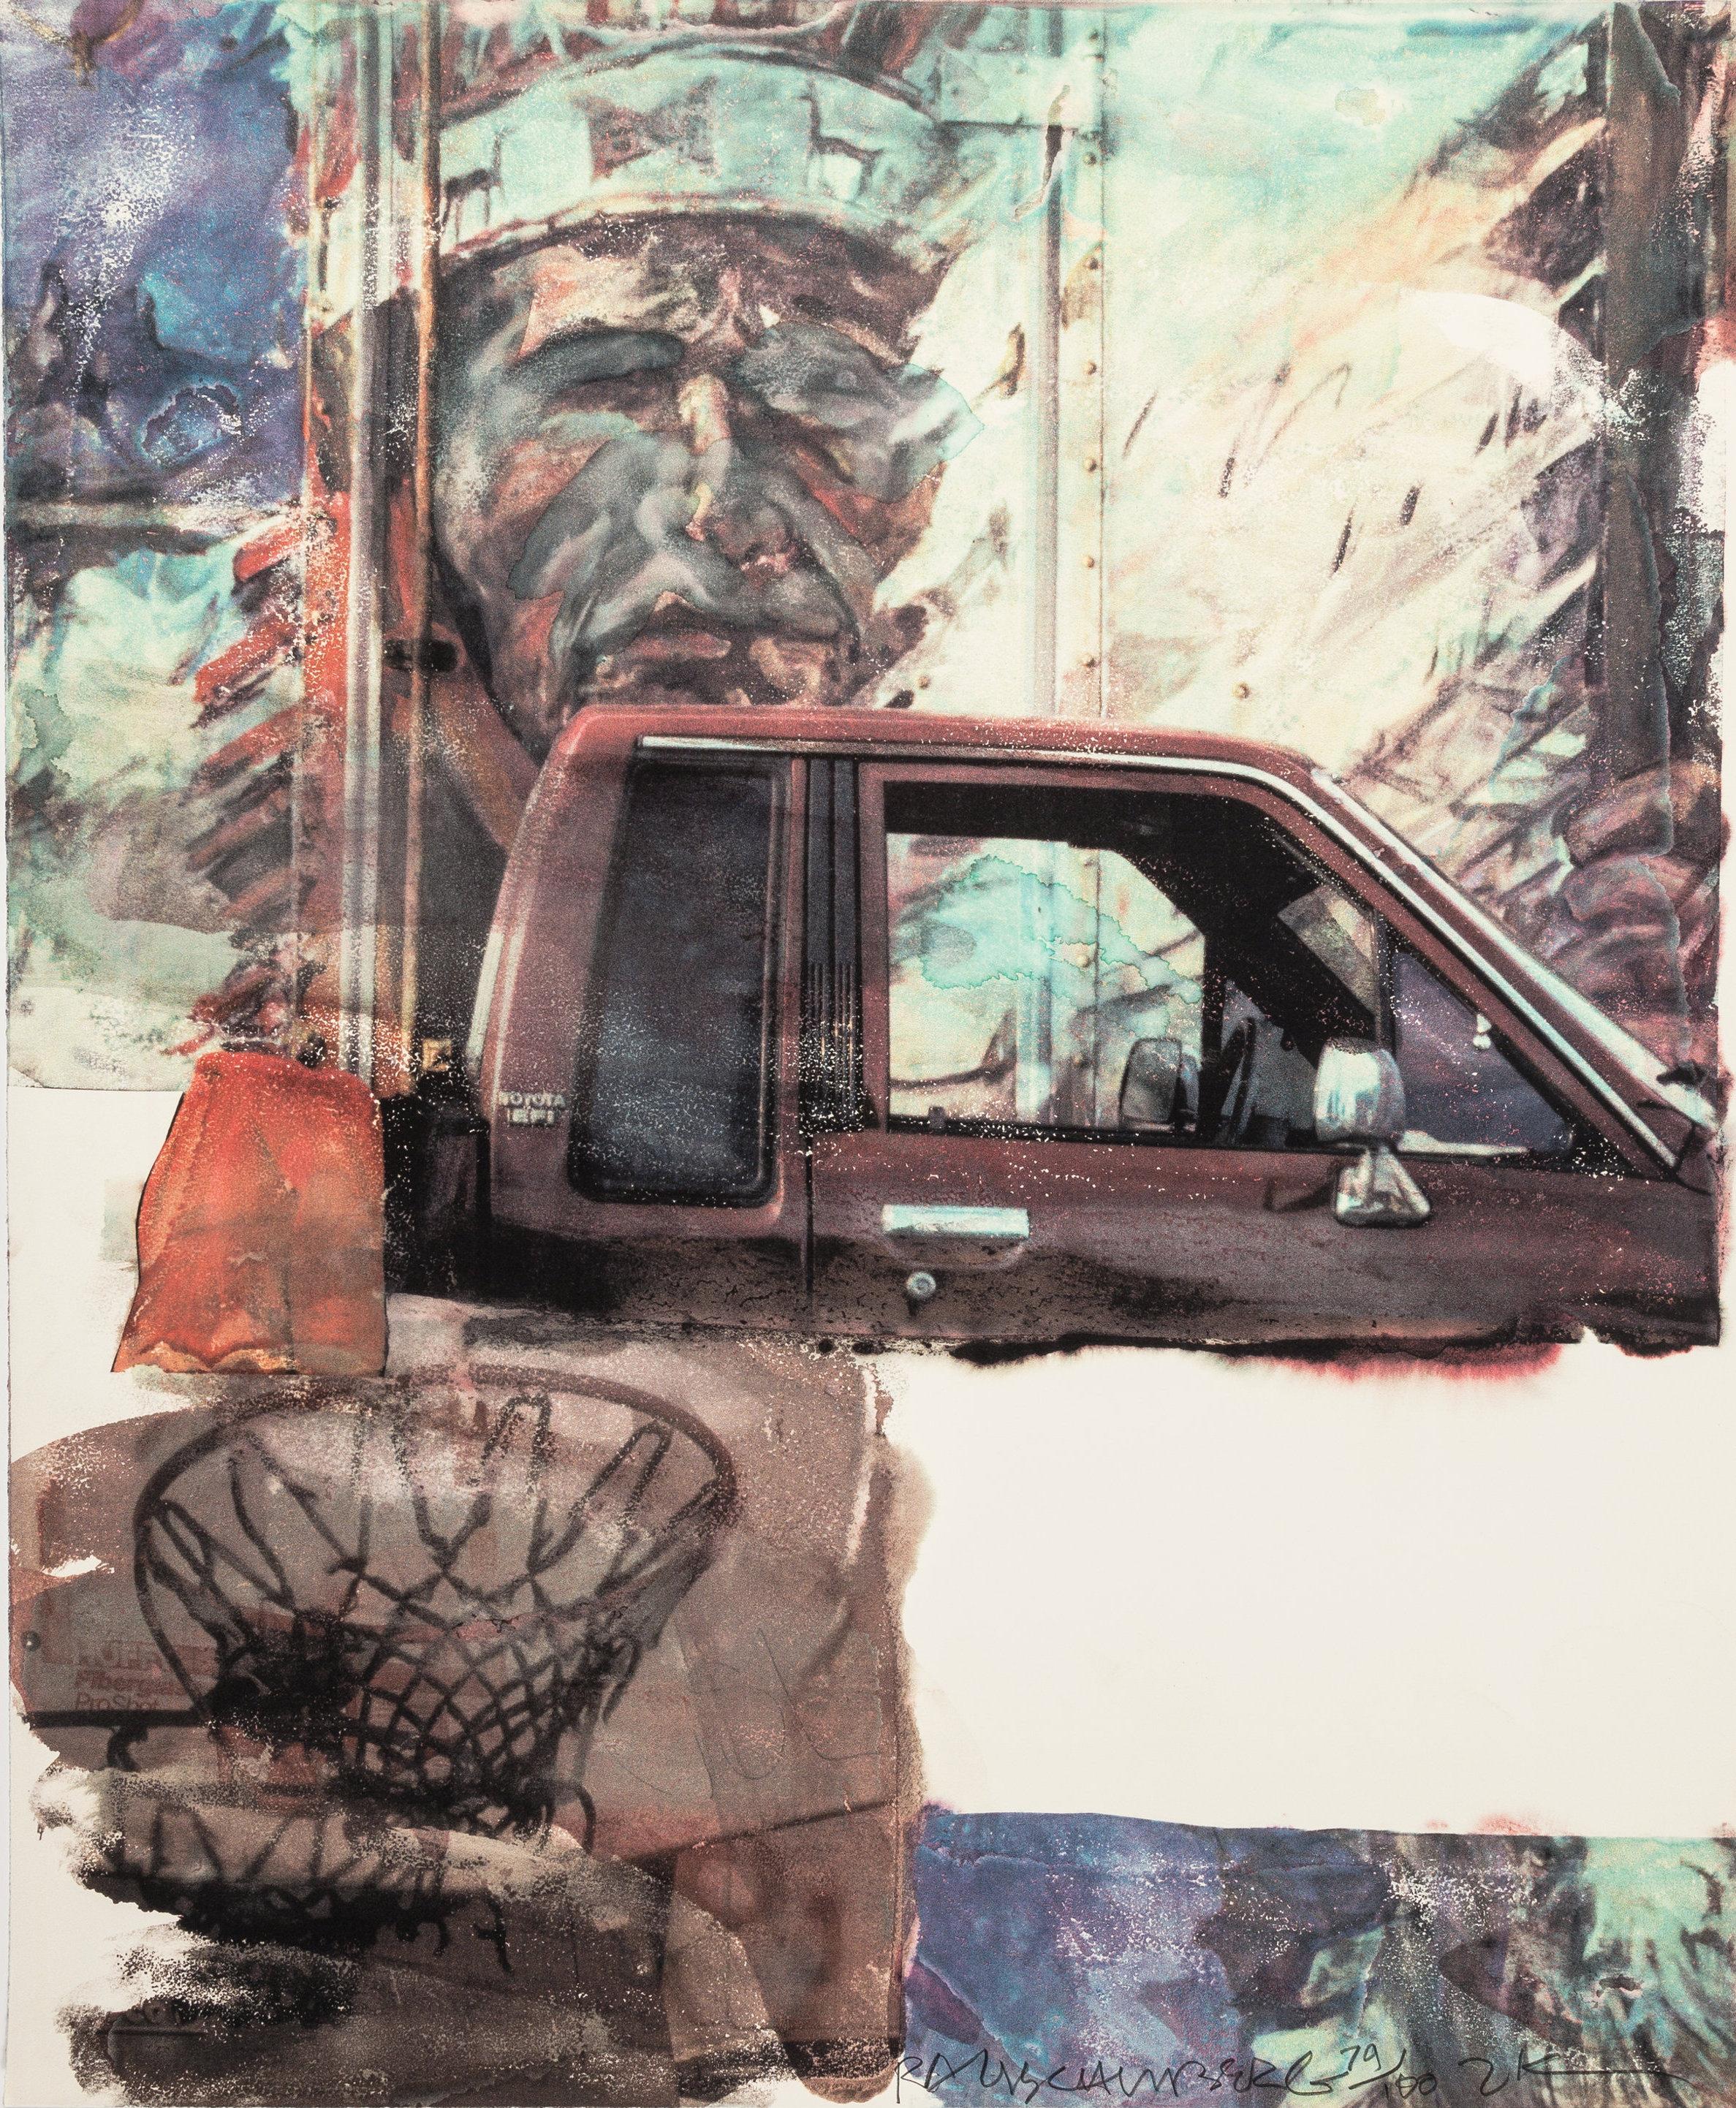 "American Indian" (2000) is a limited edition archival pigment print on Concord rag paper created by world renowned American artist James Robert Rauschenberg (1925 - 2008). 

Edition 79 of 100, the artwork is hand signed, dated and numbered in